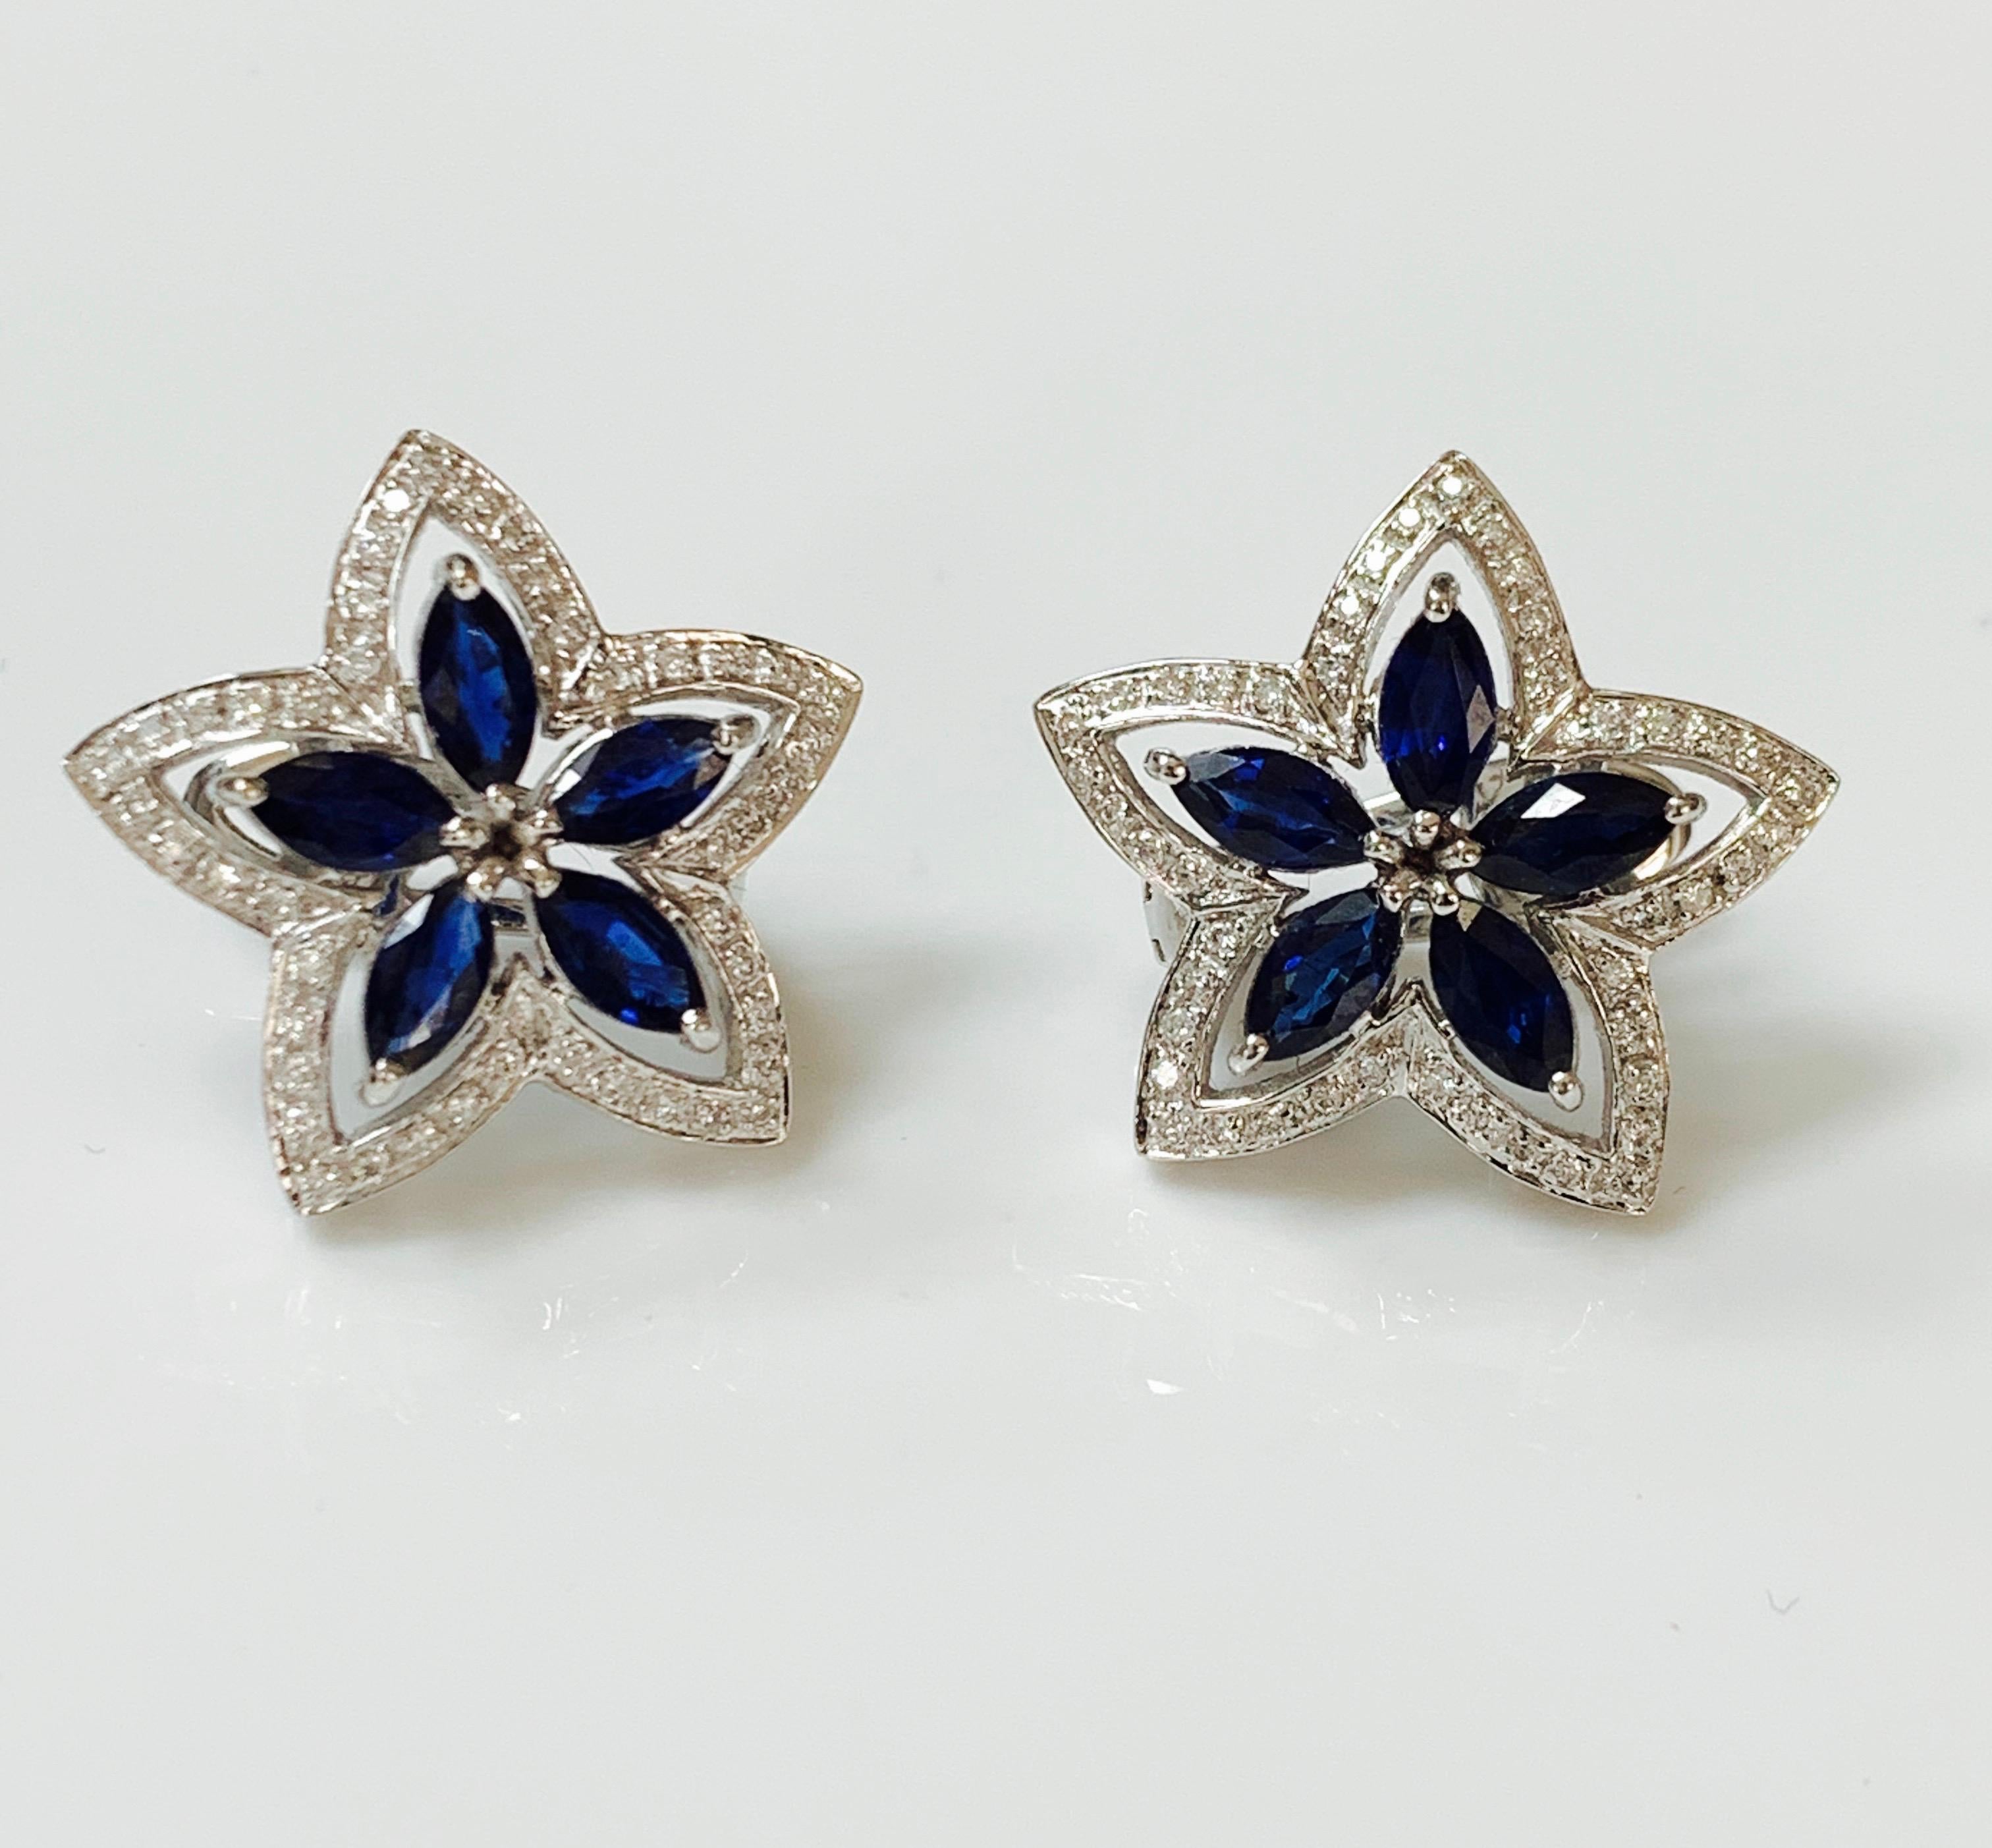 Gorgeous pair of diamond and blue sapphire star stud earrings hand crafted in 18 k white gold. 
The details are as follows : 
Diamond  weight : 0.50 carat 
Blue Sapphire weight : 2.82 carat 
Measurements : 1 inch by 1 inch 
